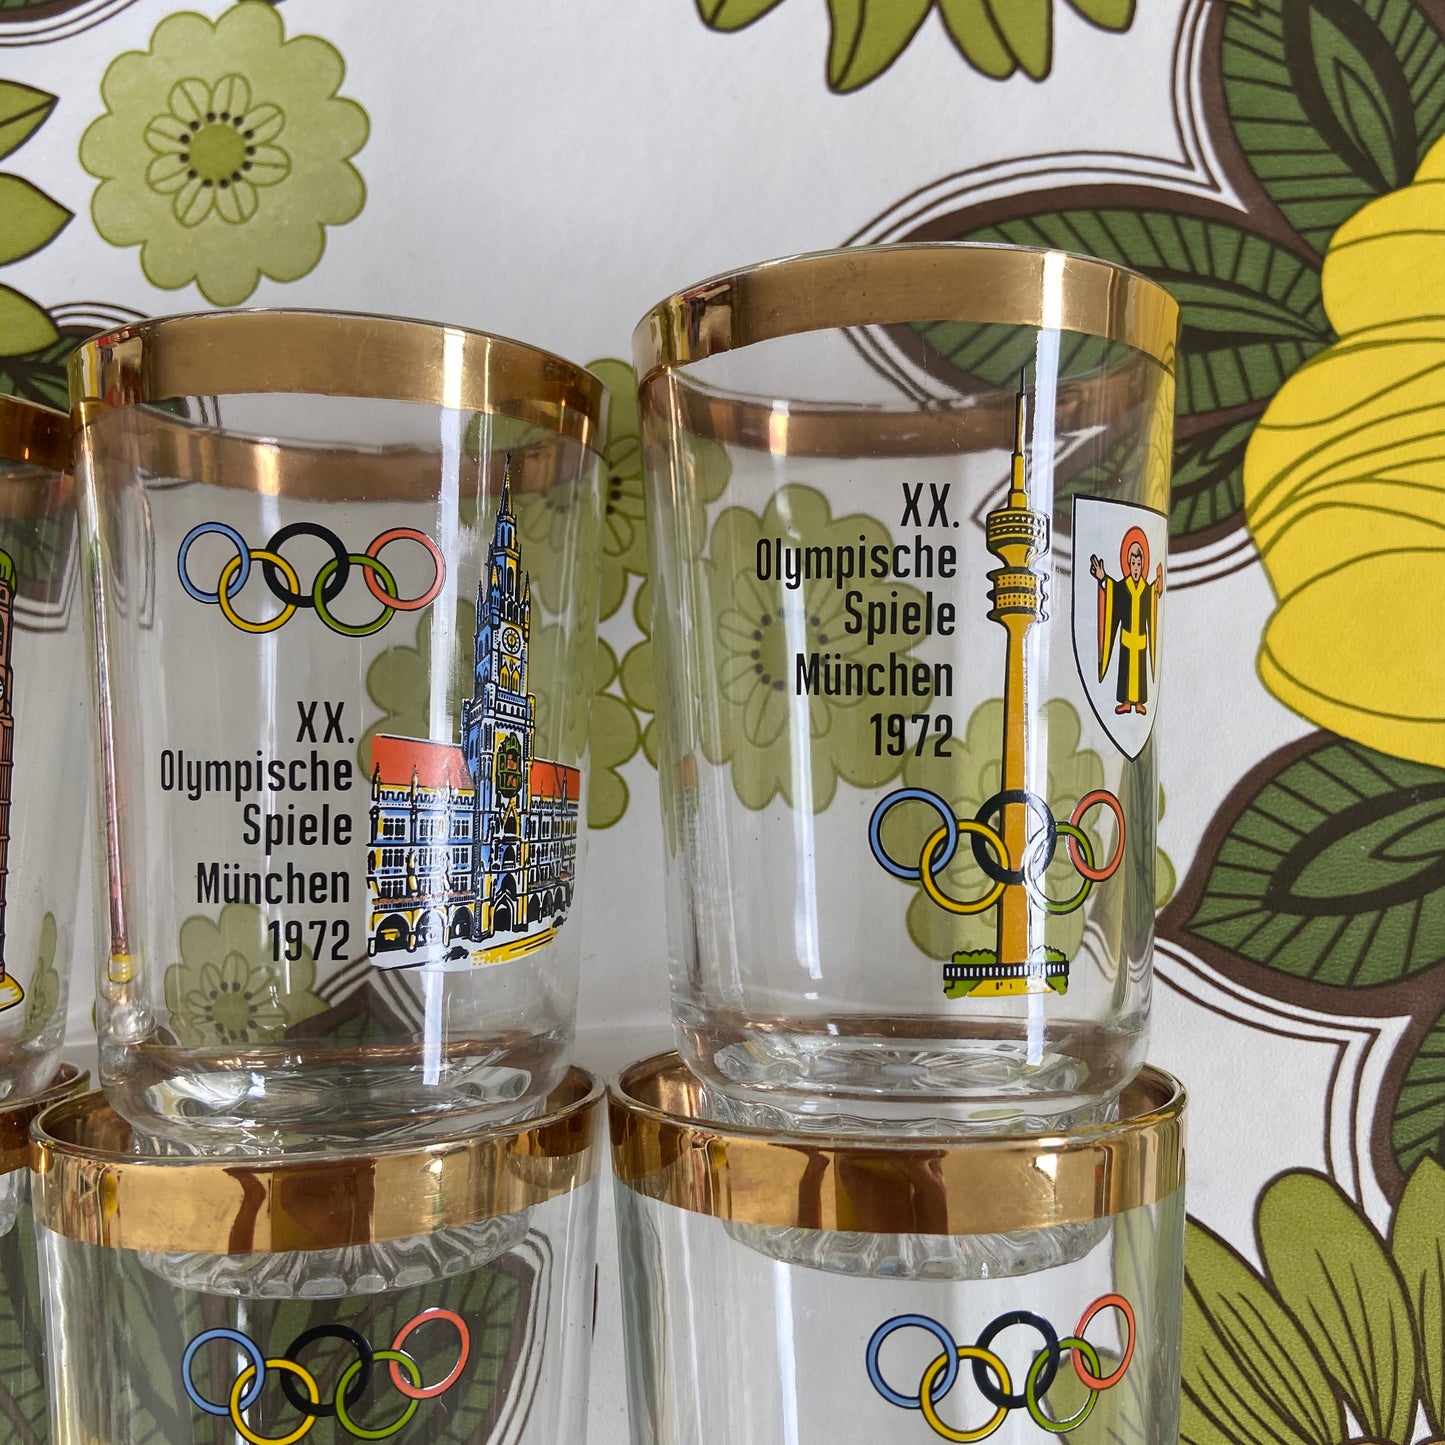 1972 OLYMPICS Olympische Spiele Munchen Set of SIX Collectable Souvenirs